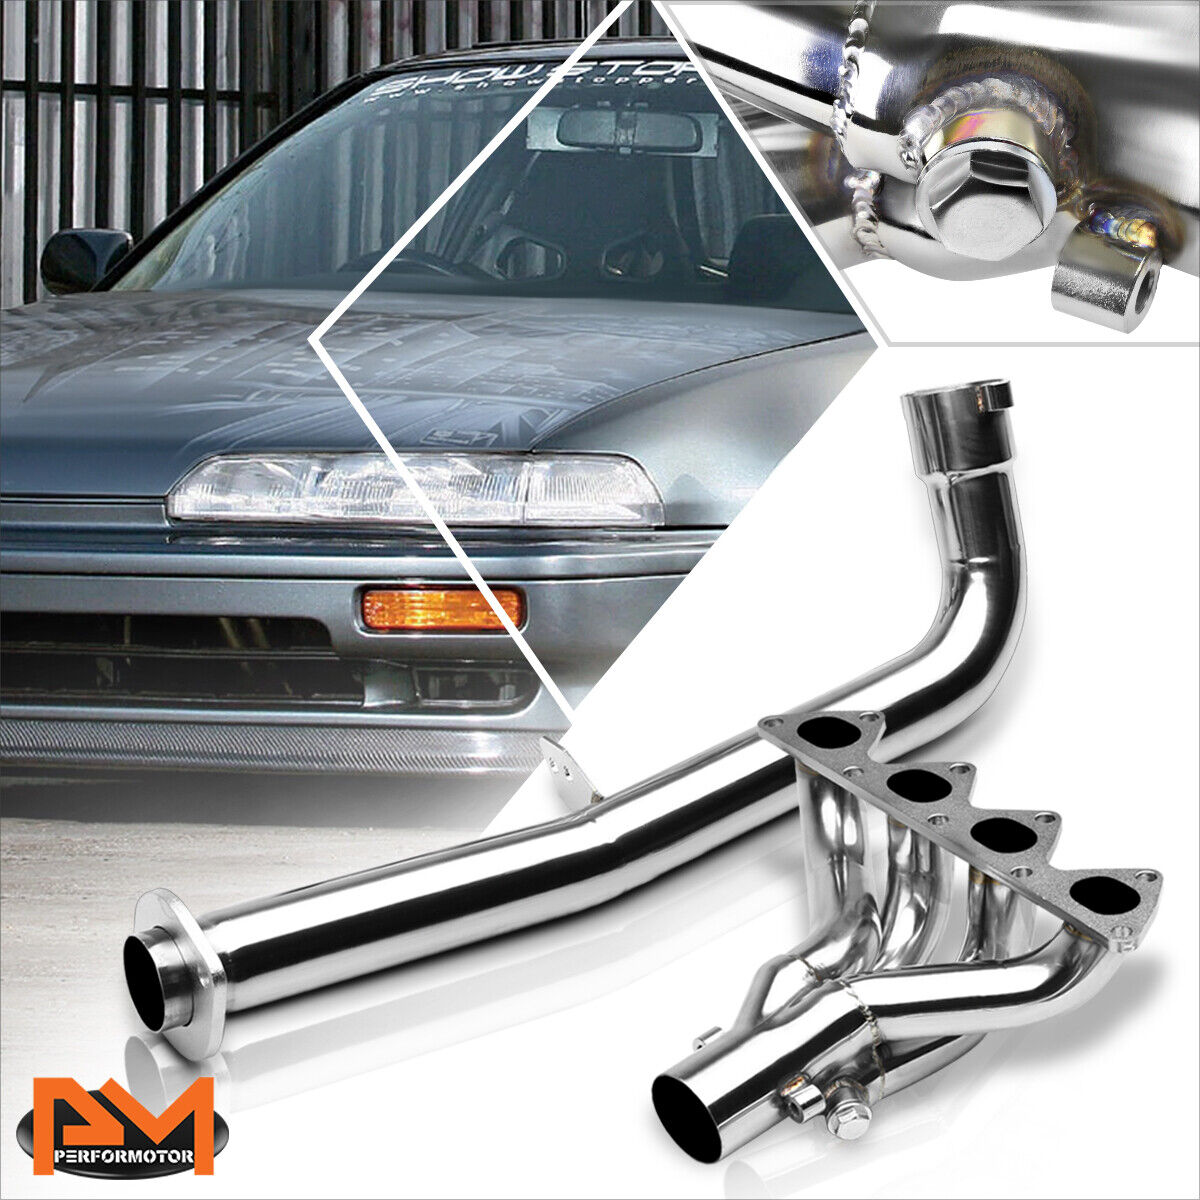 For 90-91 Acura Integra B18/B18A1 Stainless Steel 4-1 Exhaust Header Manifold